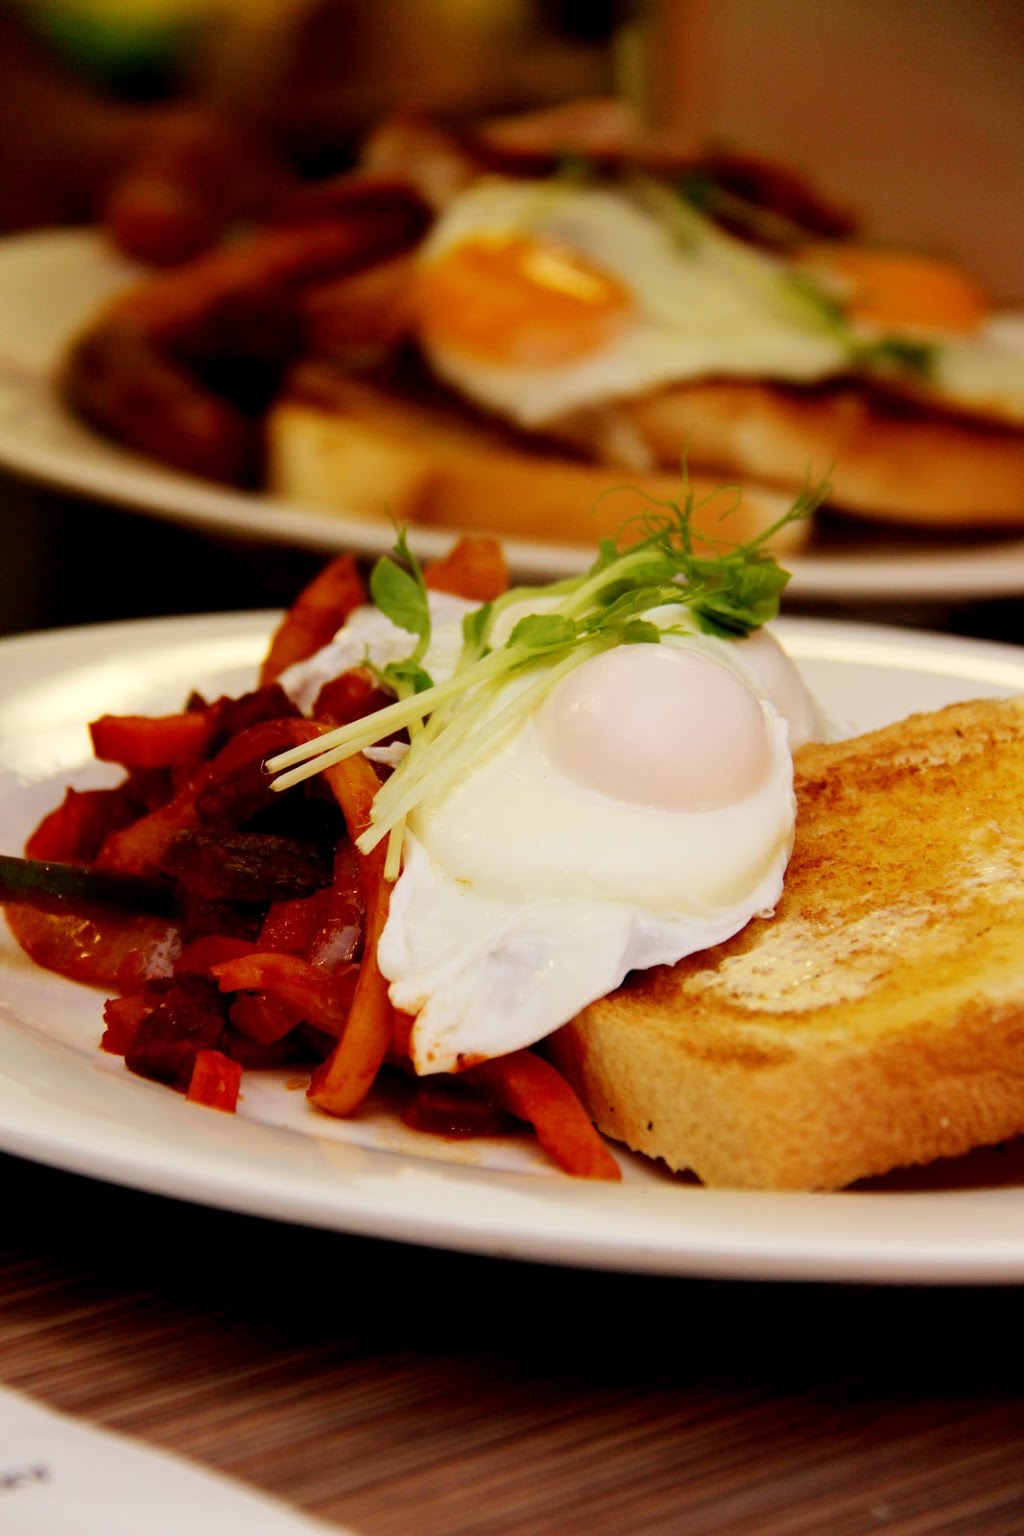 Valley Cafe | cafe | 20 Manning St, Taree NSW 2430, Australia | 0265515723 OR +61 2 6551 5723